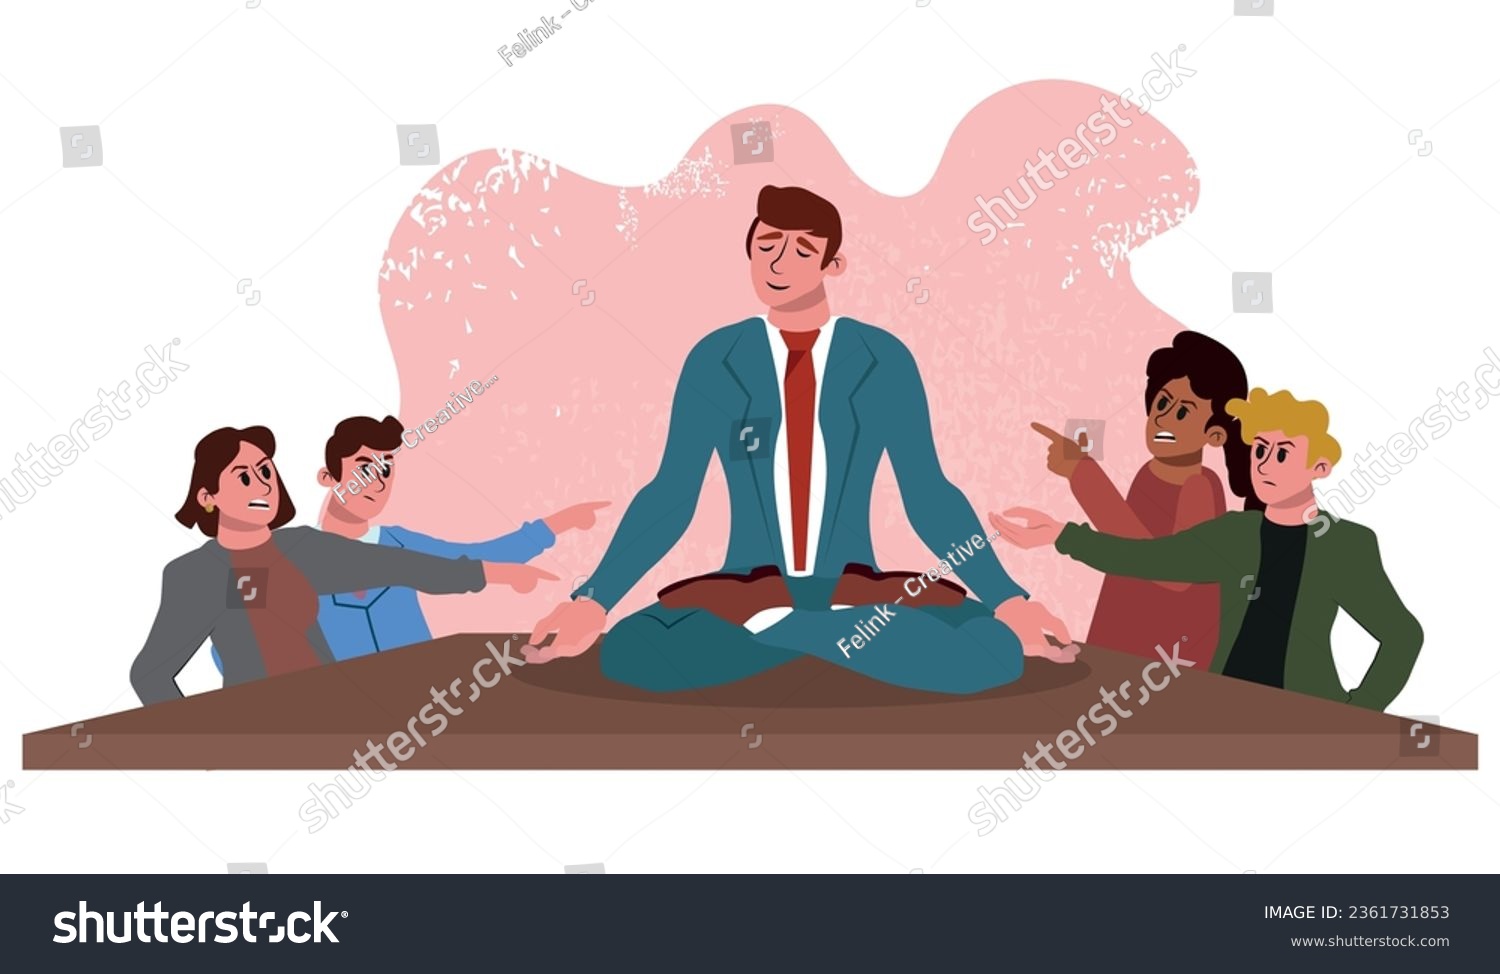 Business negotiation, male partners arguing, funny relaxed man keeping calm in stressful situation, meditating with composed smile, dealing with emotional angry customer, stress management concept #2361731853